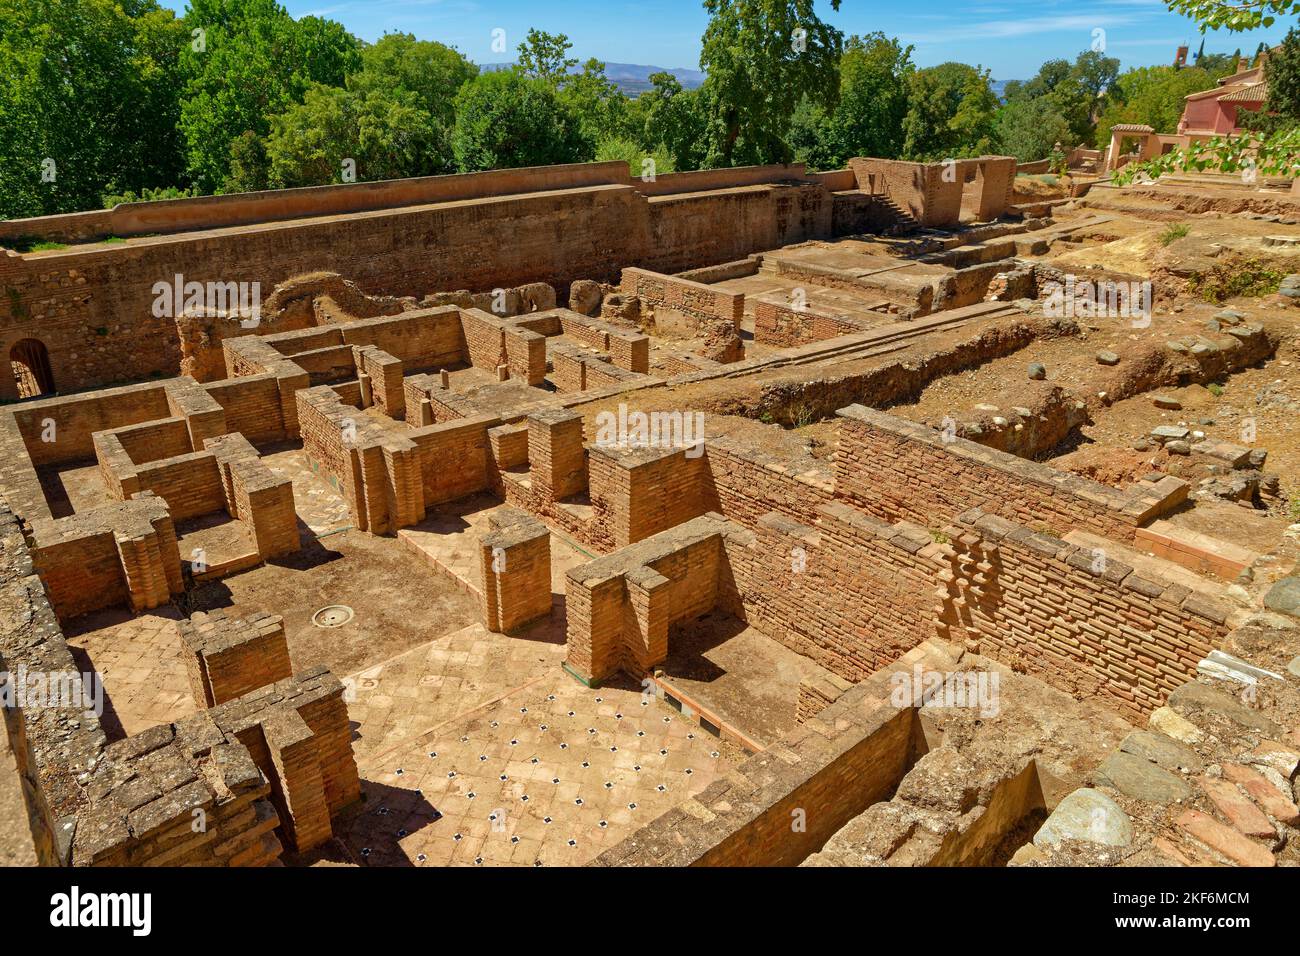 Remains of the Palacio de los Abencerrajes within the grounds of the Alhambra Palace complex at Granada in Spain. Stock Photo